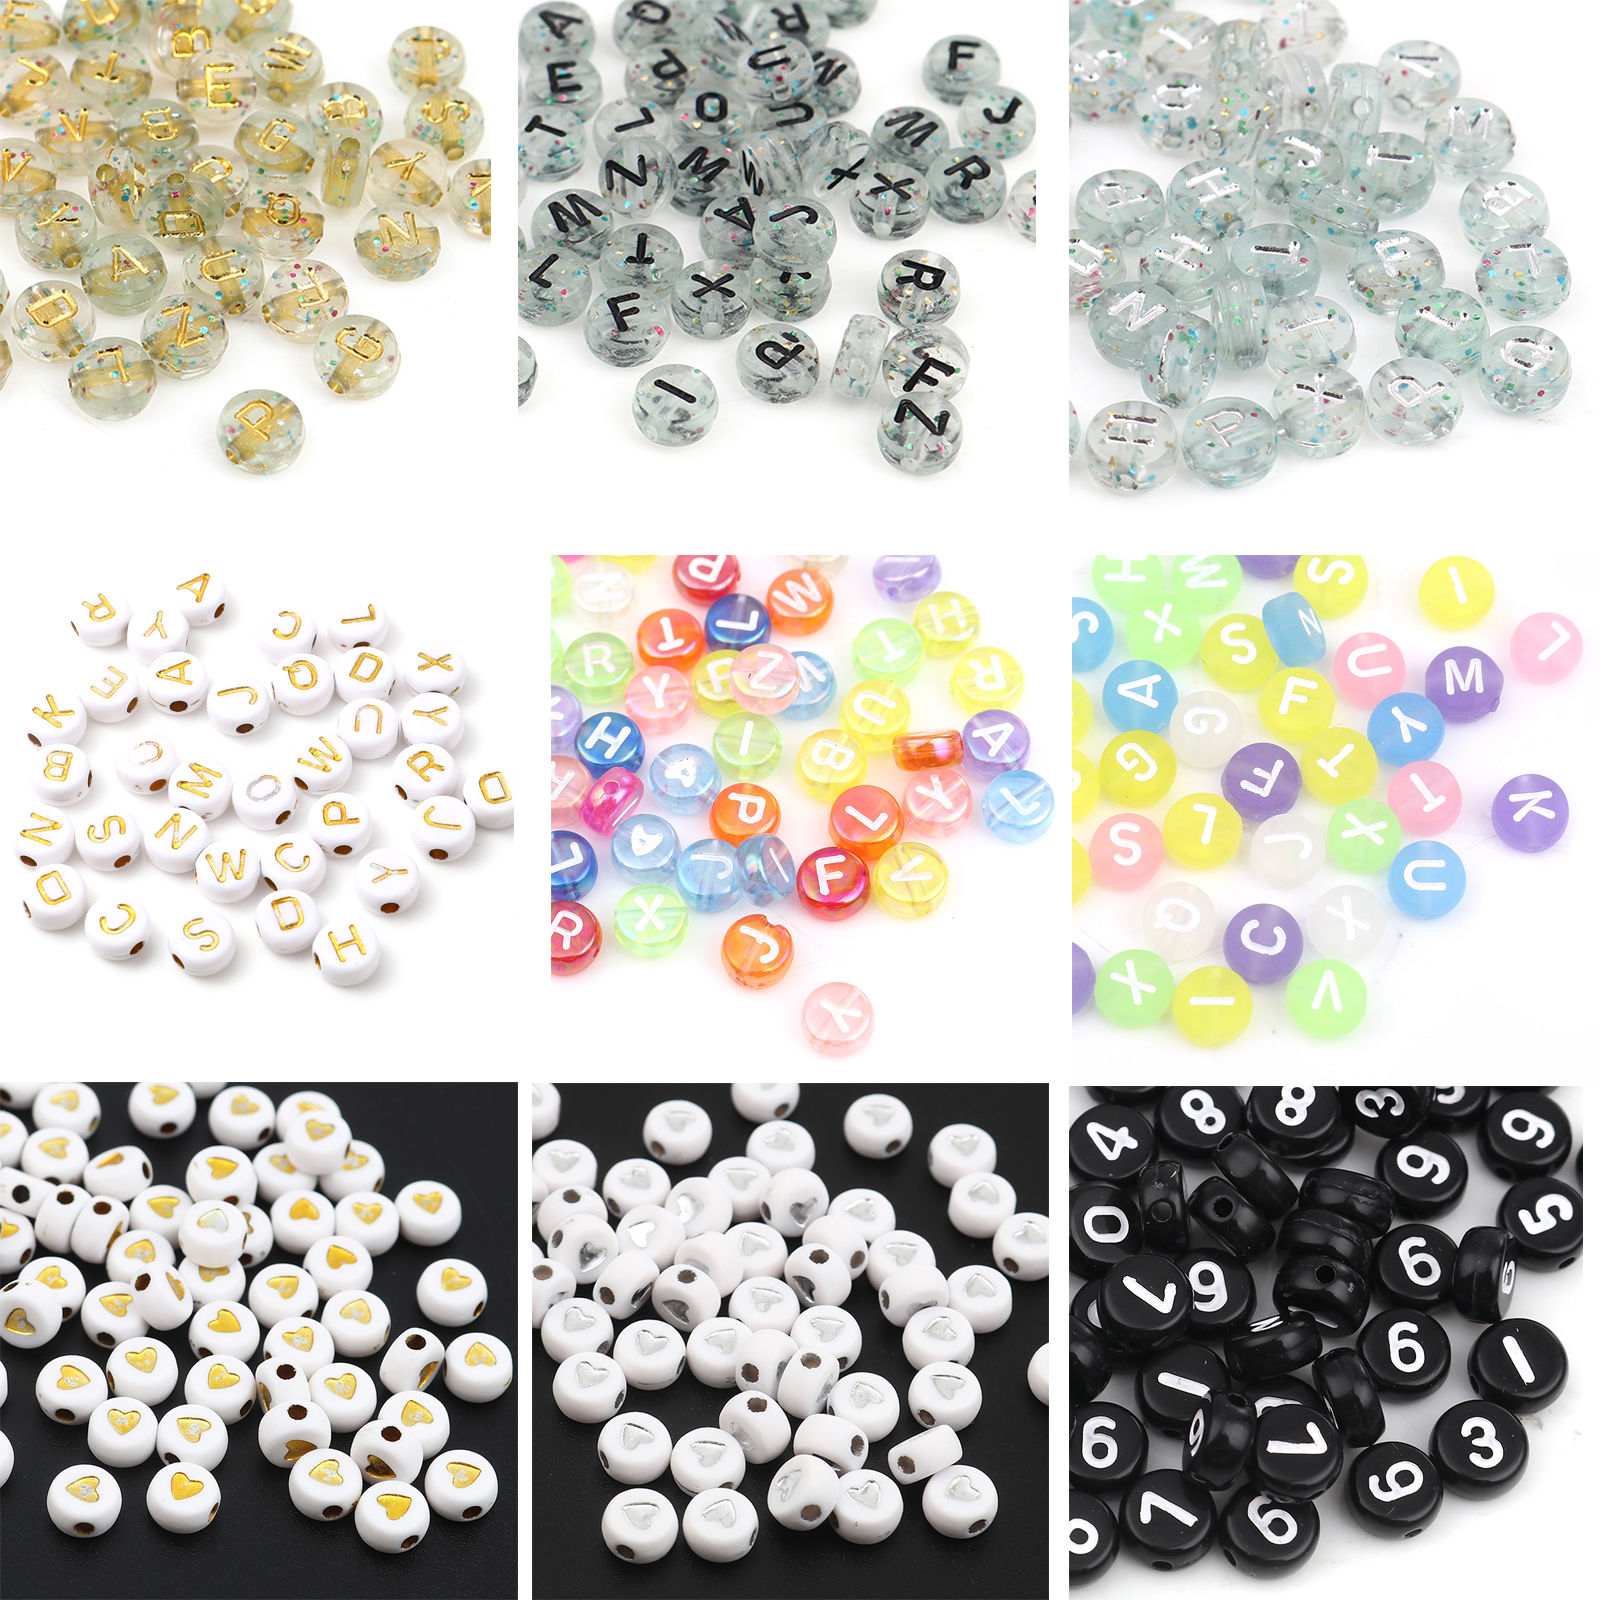 Picture of Acrylic Beads Flat Round White & Golden Number Pattern About 7mm Dia., Hole: Approx 1.5mm, 500 PCs